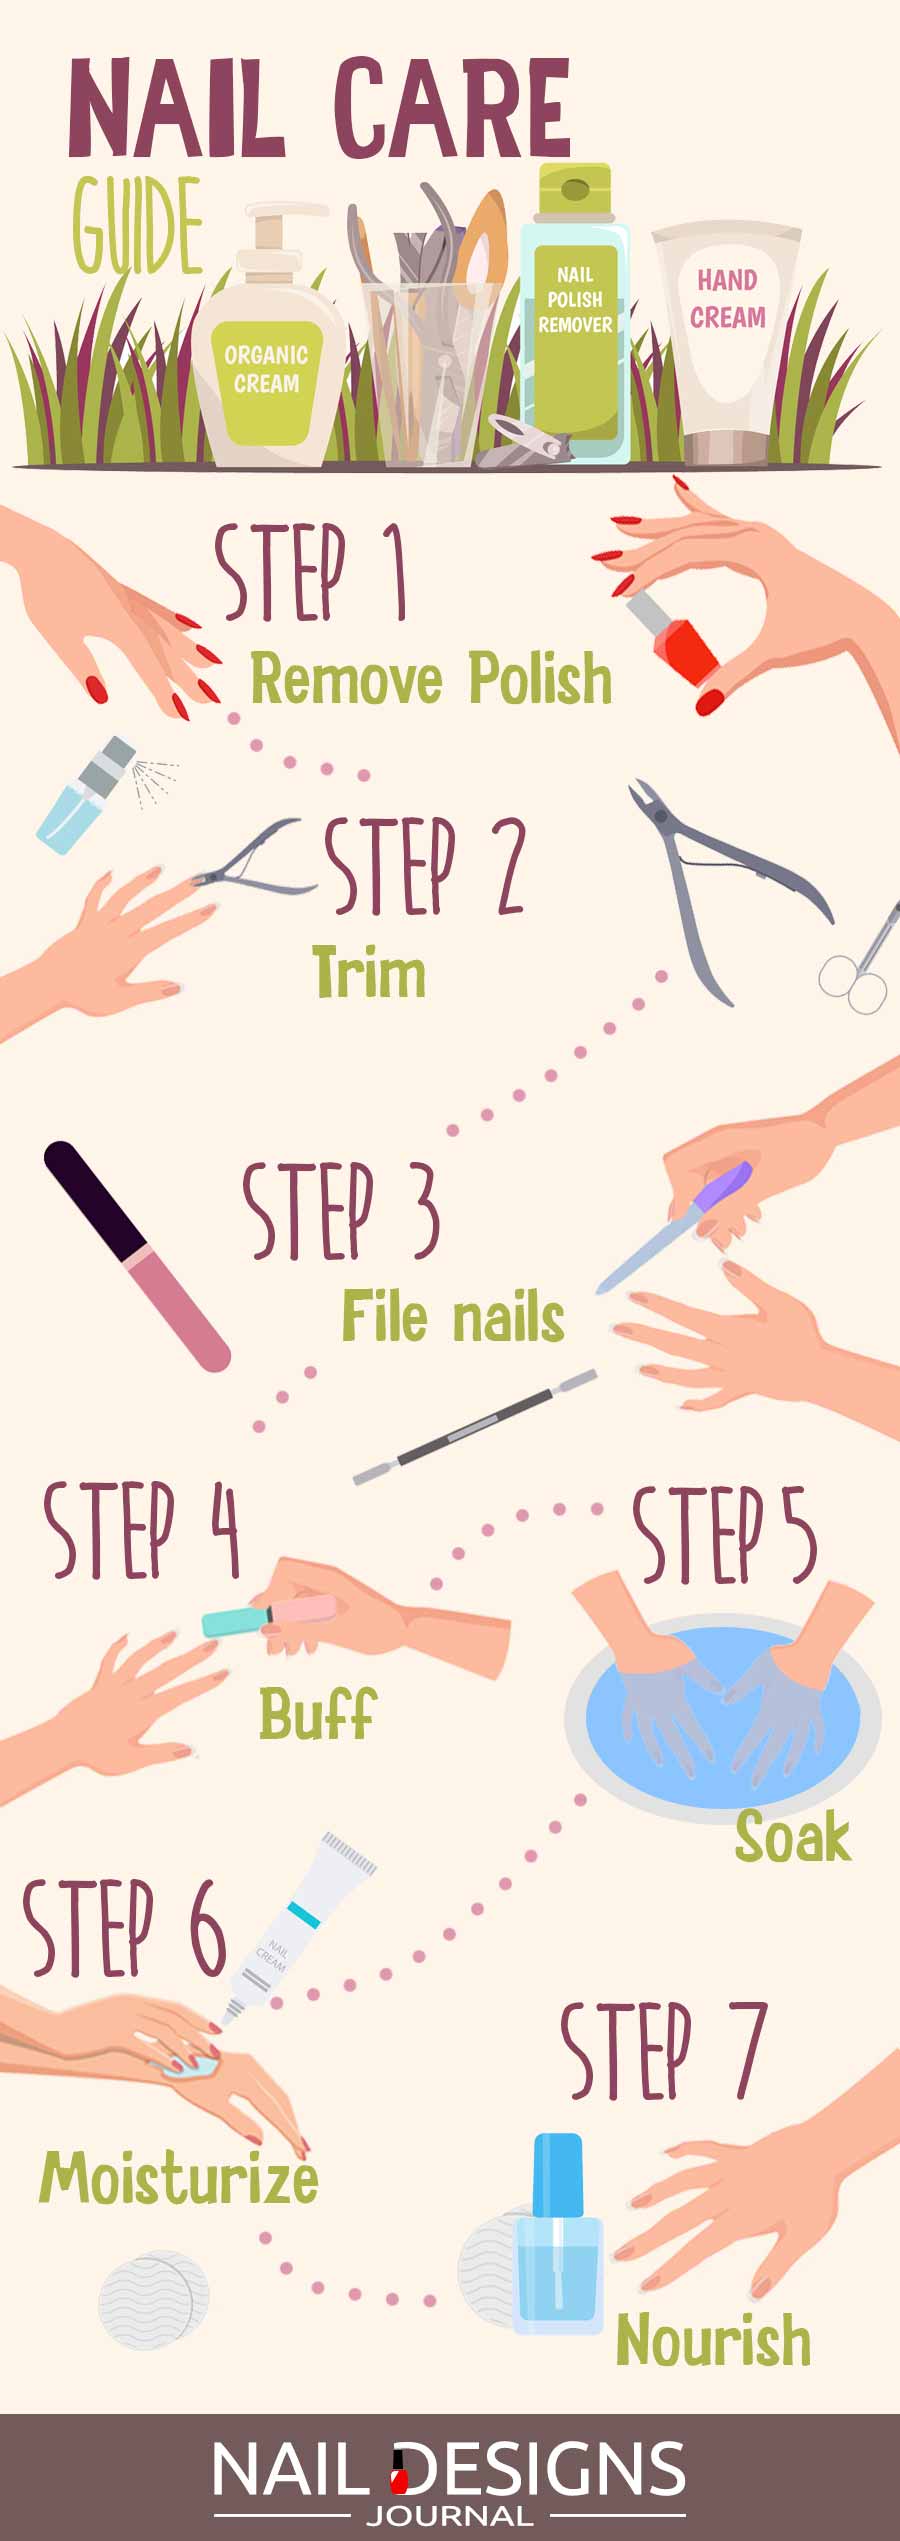 Infographic Perfect Nails Art Ideas to Spruce Up Your Look